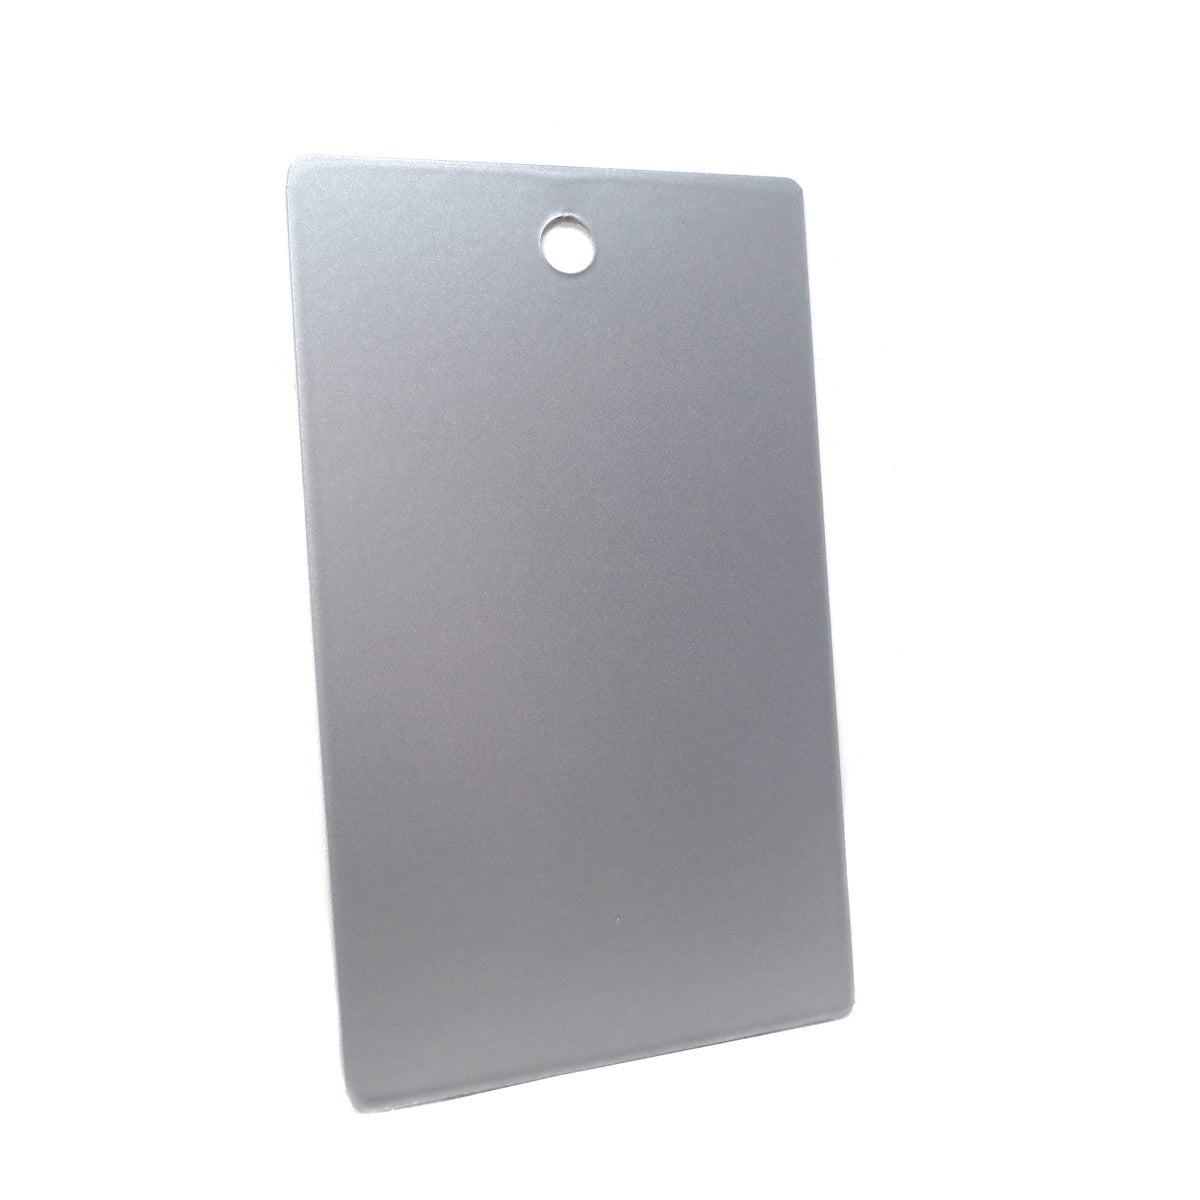 Anodized Aluminum Effect (Silver)